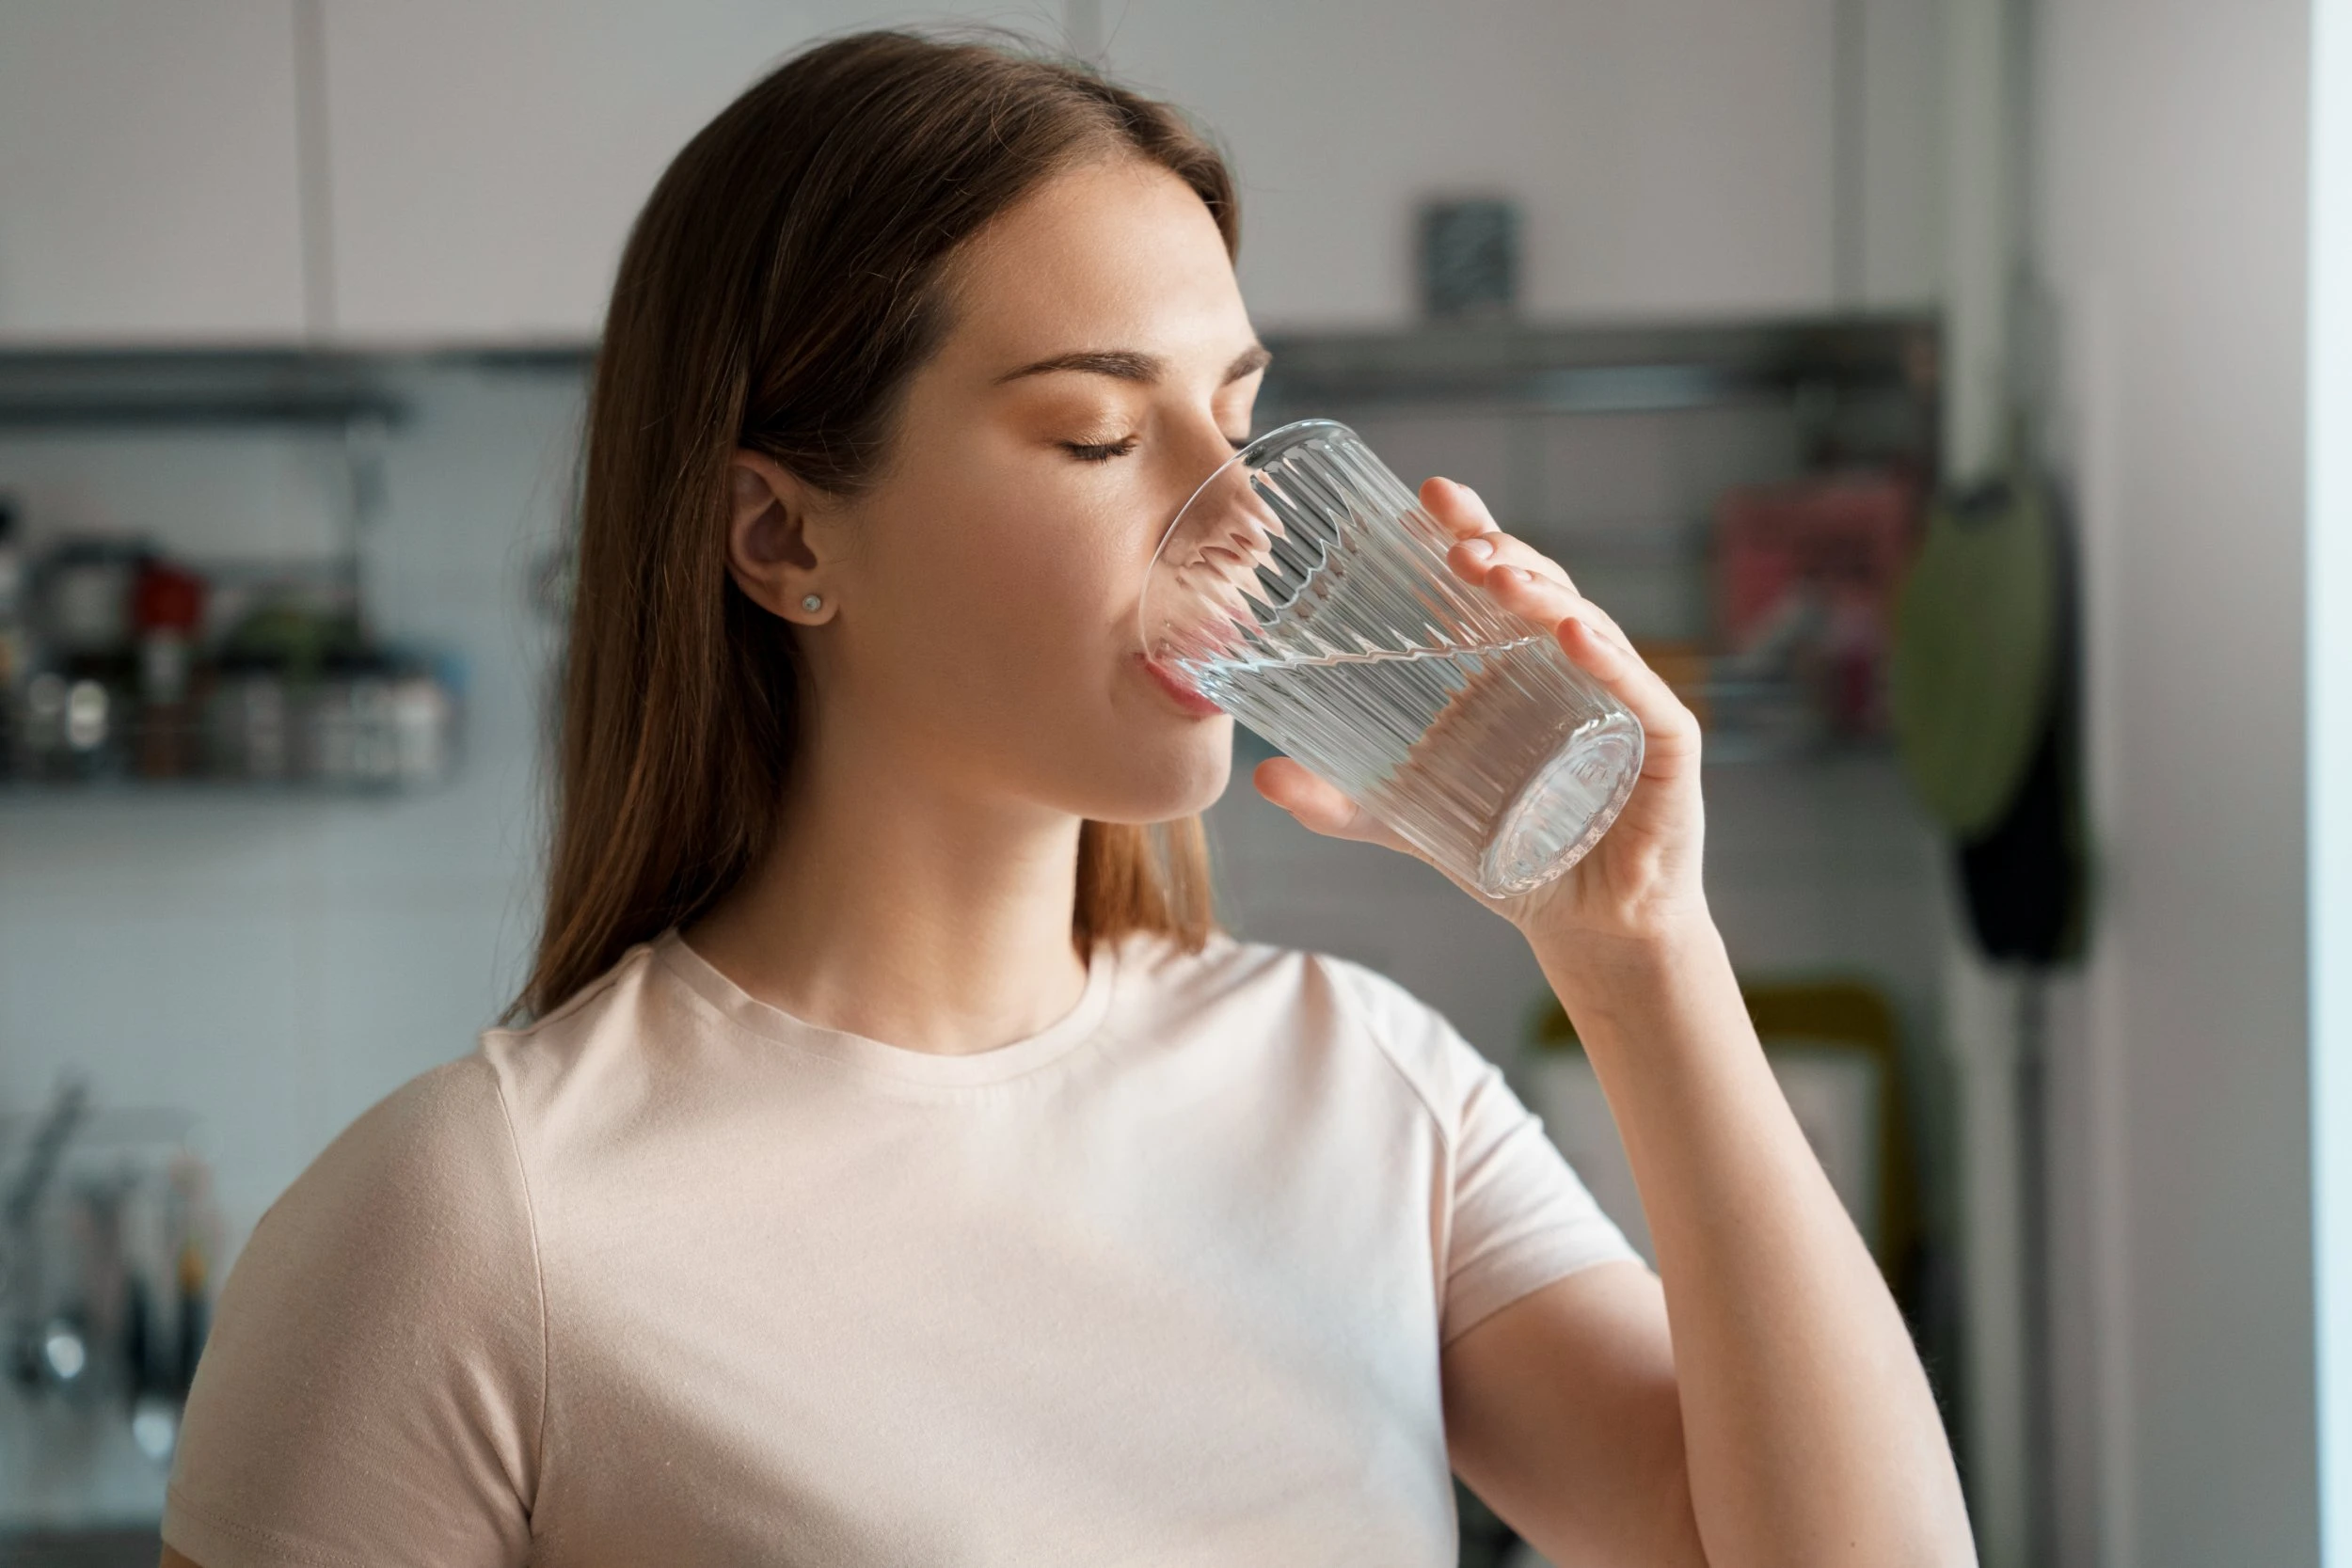 Drinking More Water Can Help Reduce Back Pain